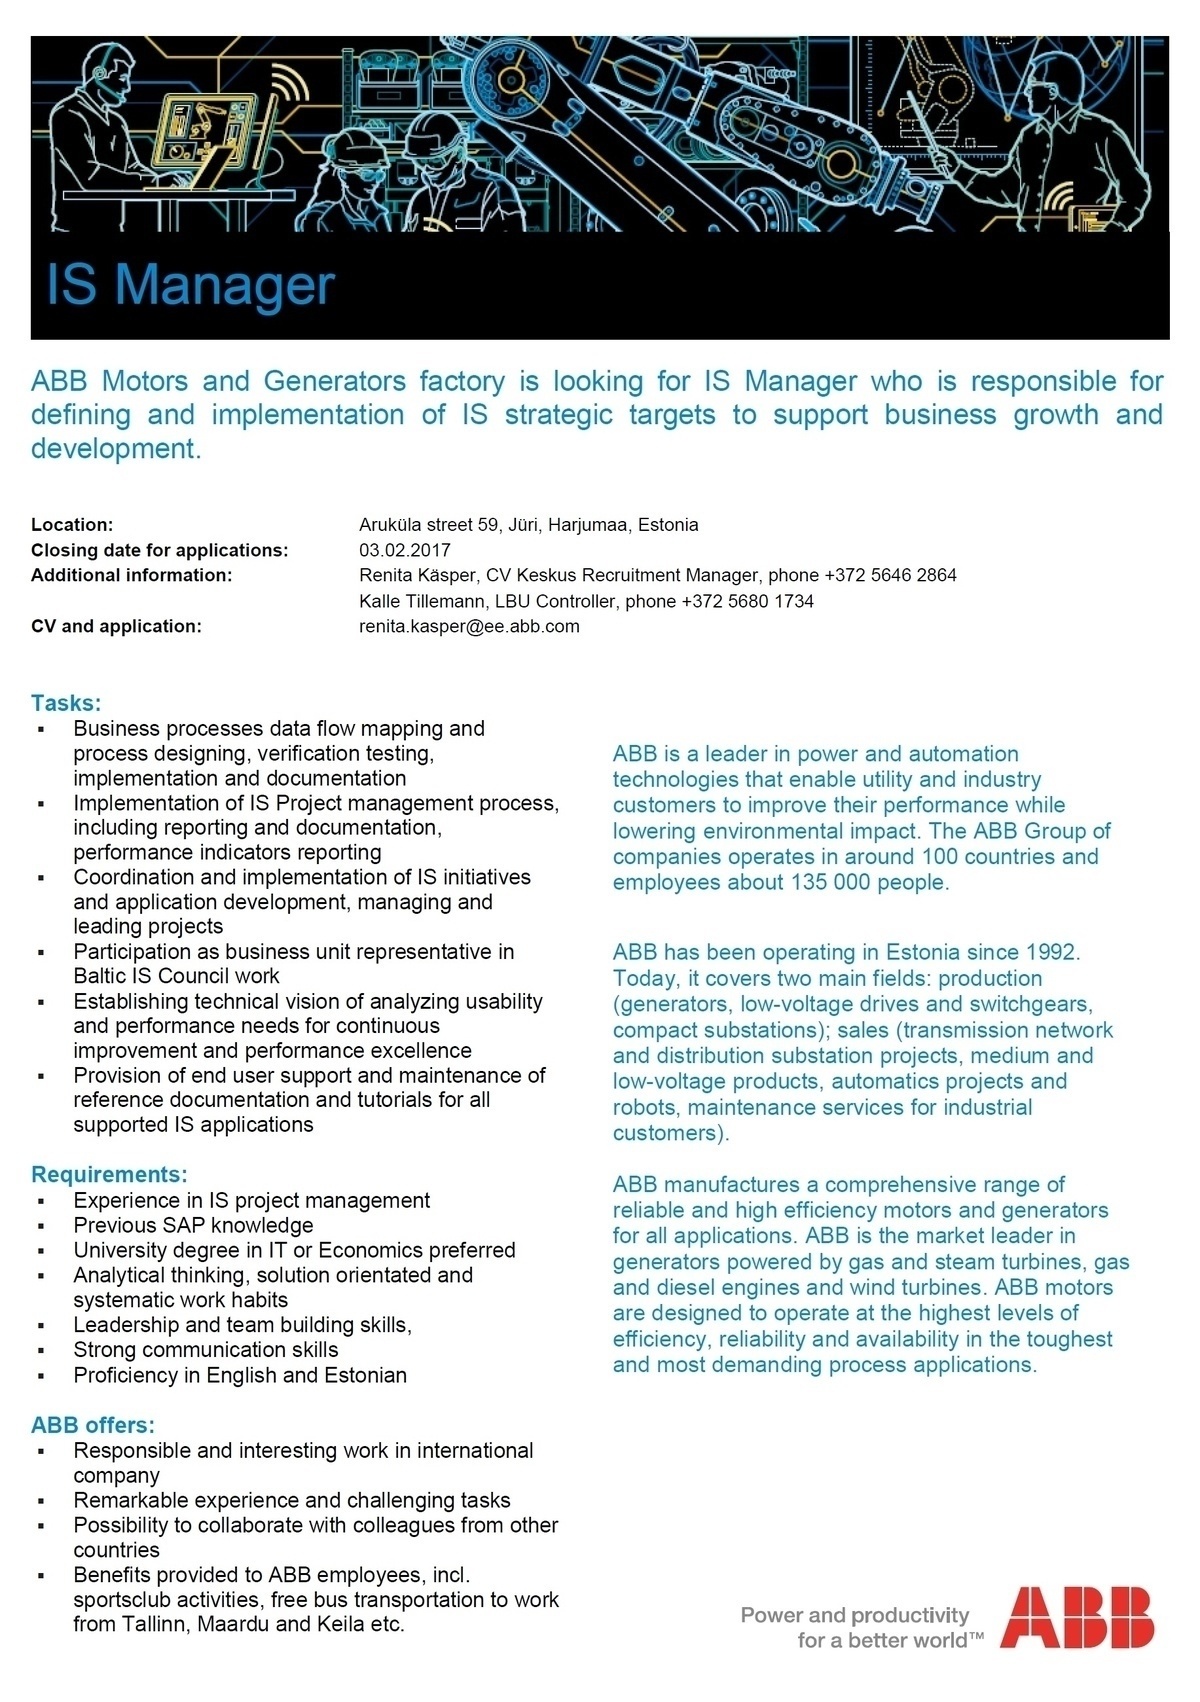 CV KESKUS OÜ ABB is looking for an IS Manager